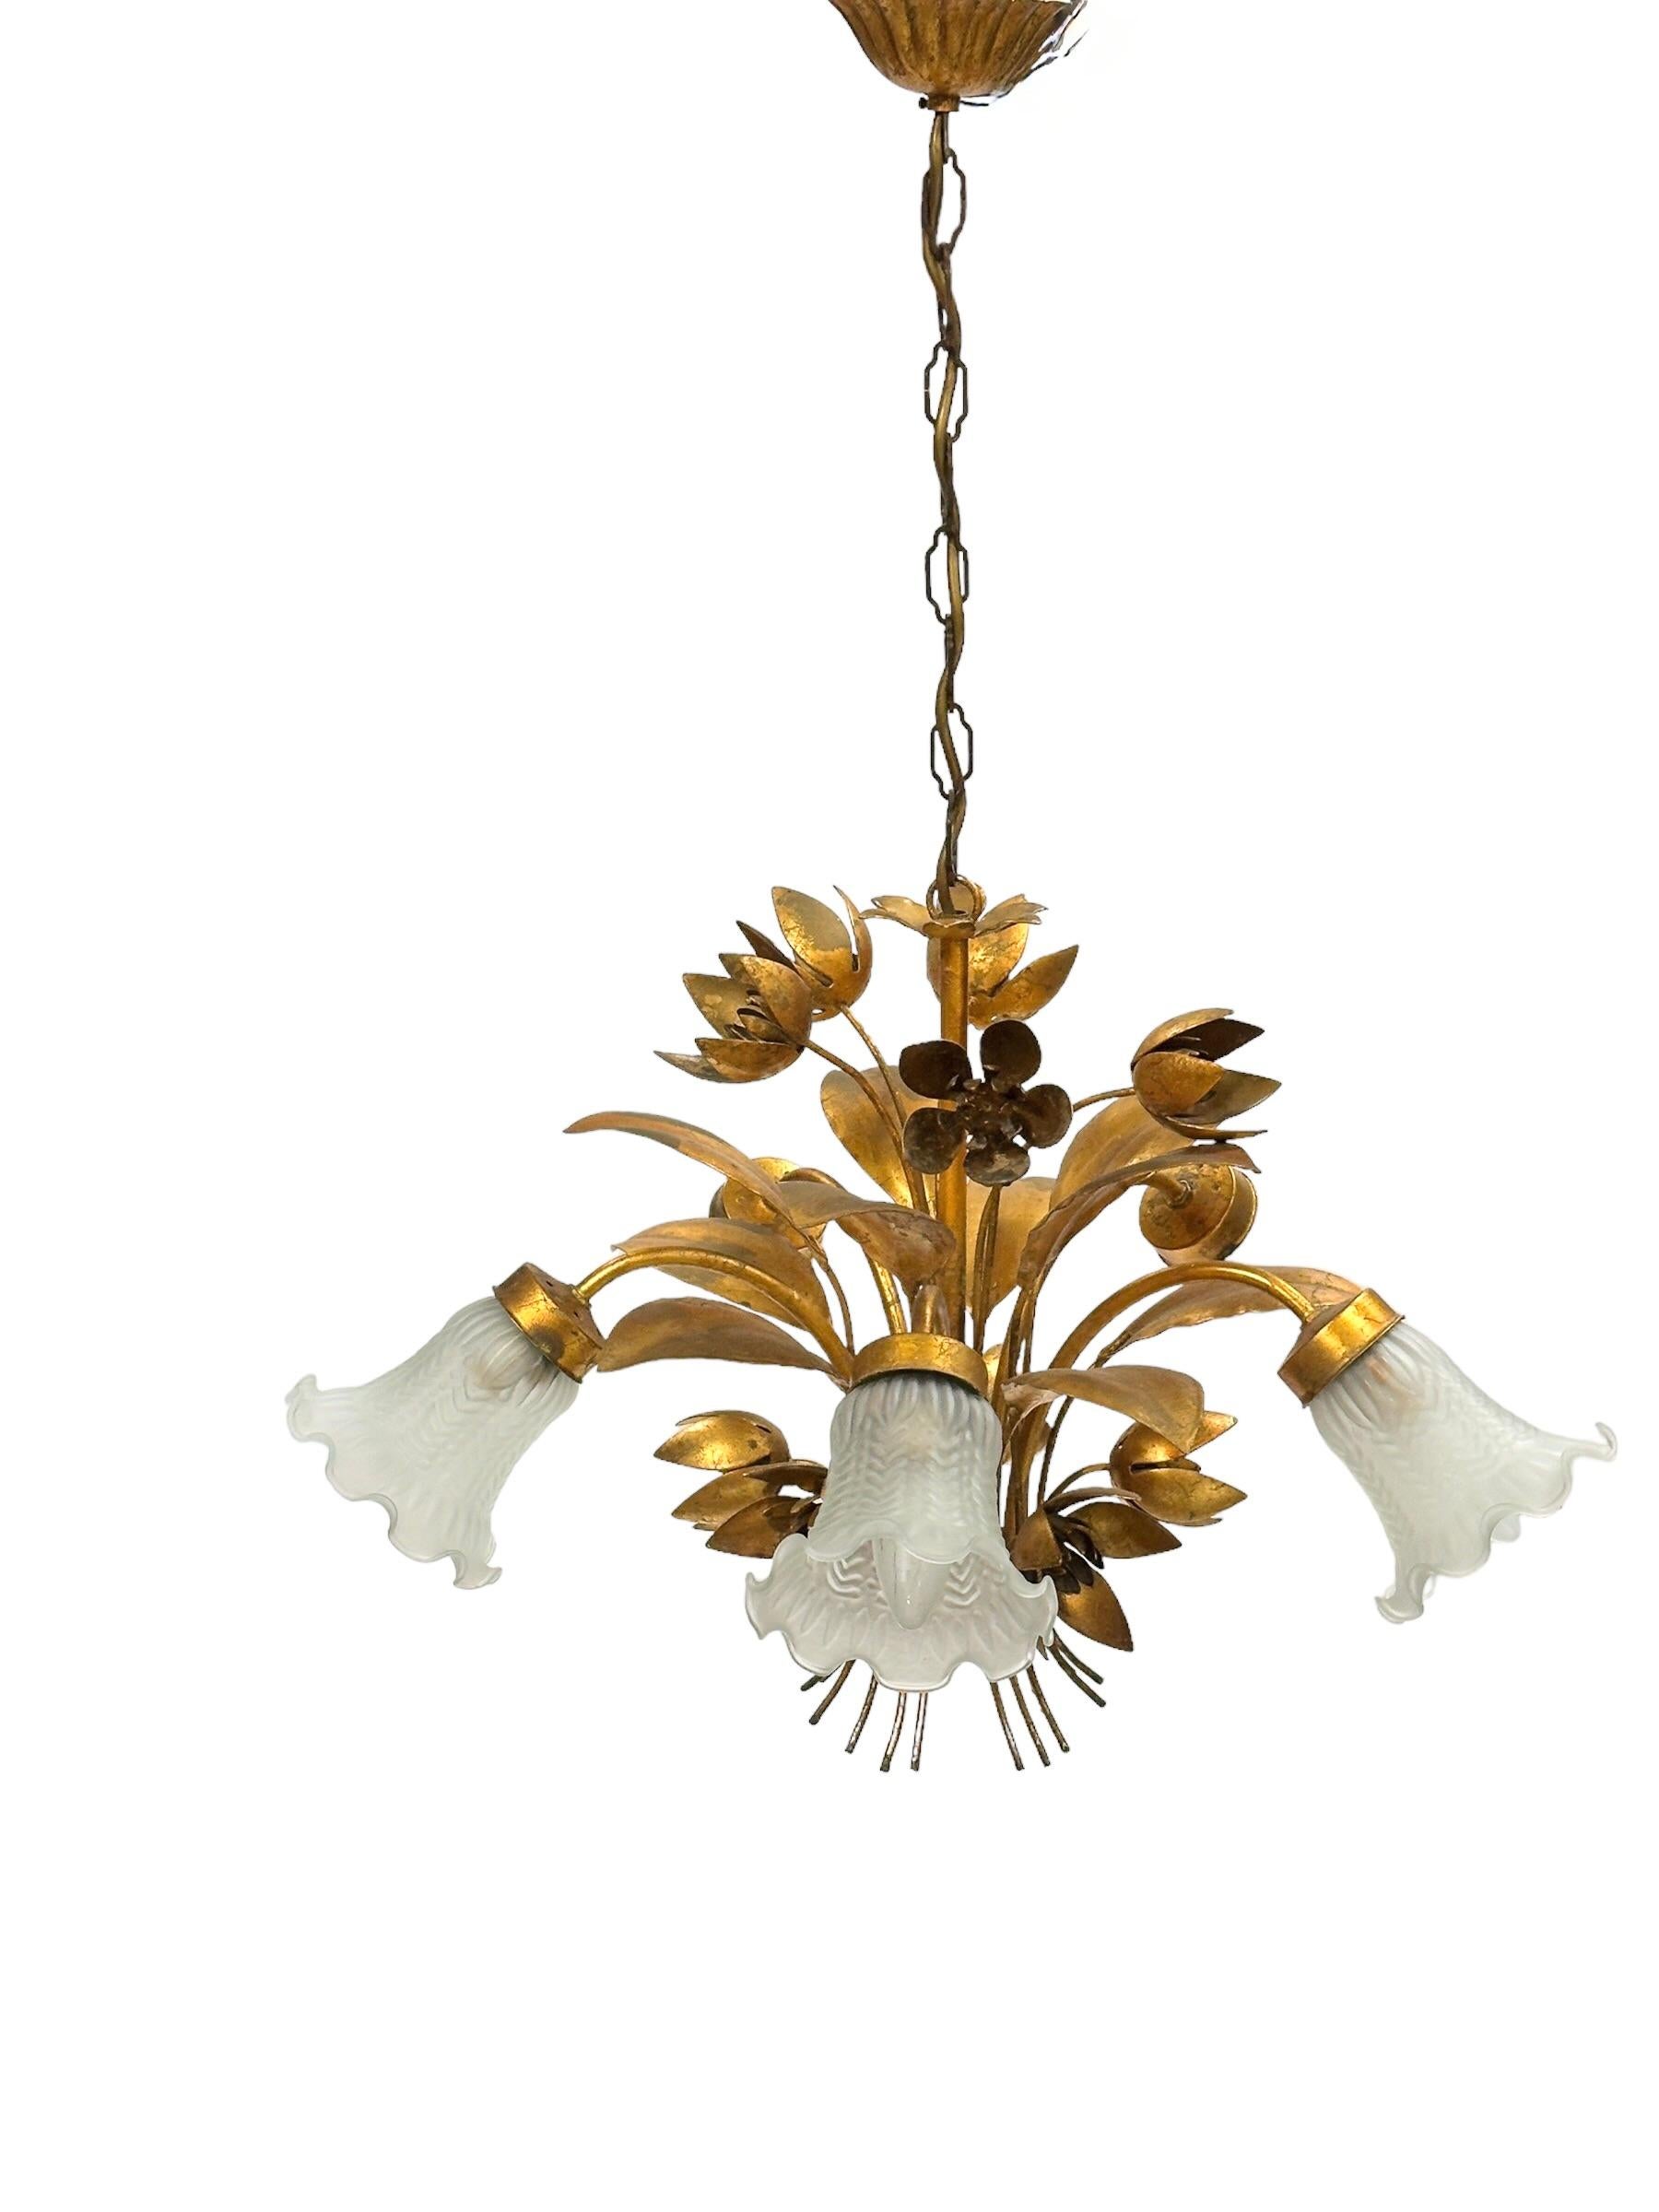 Gilt Metal & Glass Shade Five Light Chandelier Toleware Coco Chanel Style Italy  For Sale 1